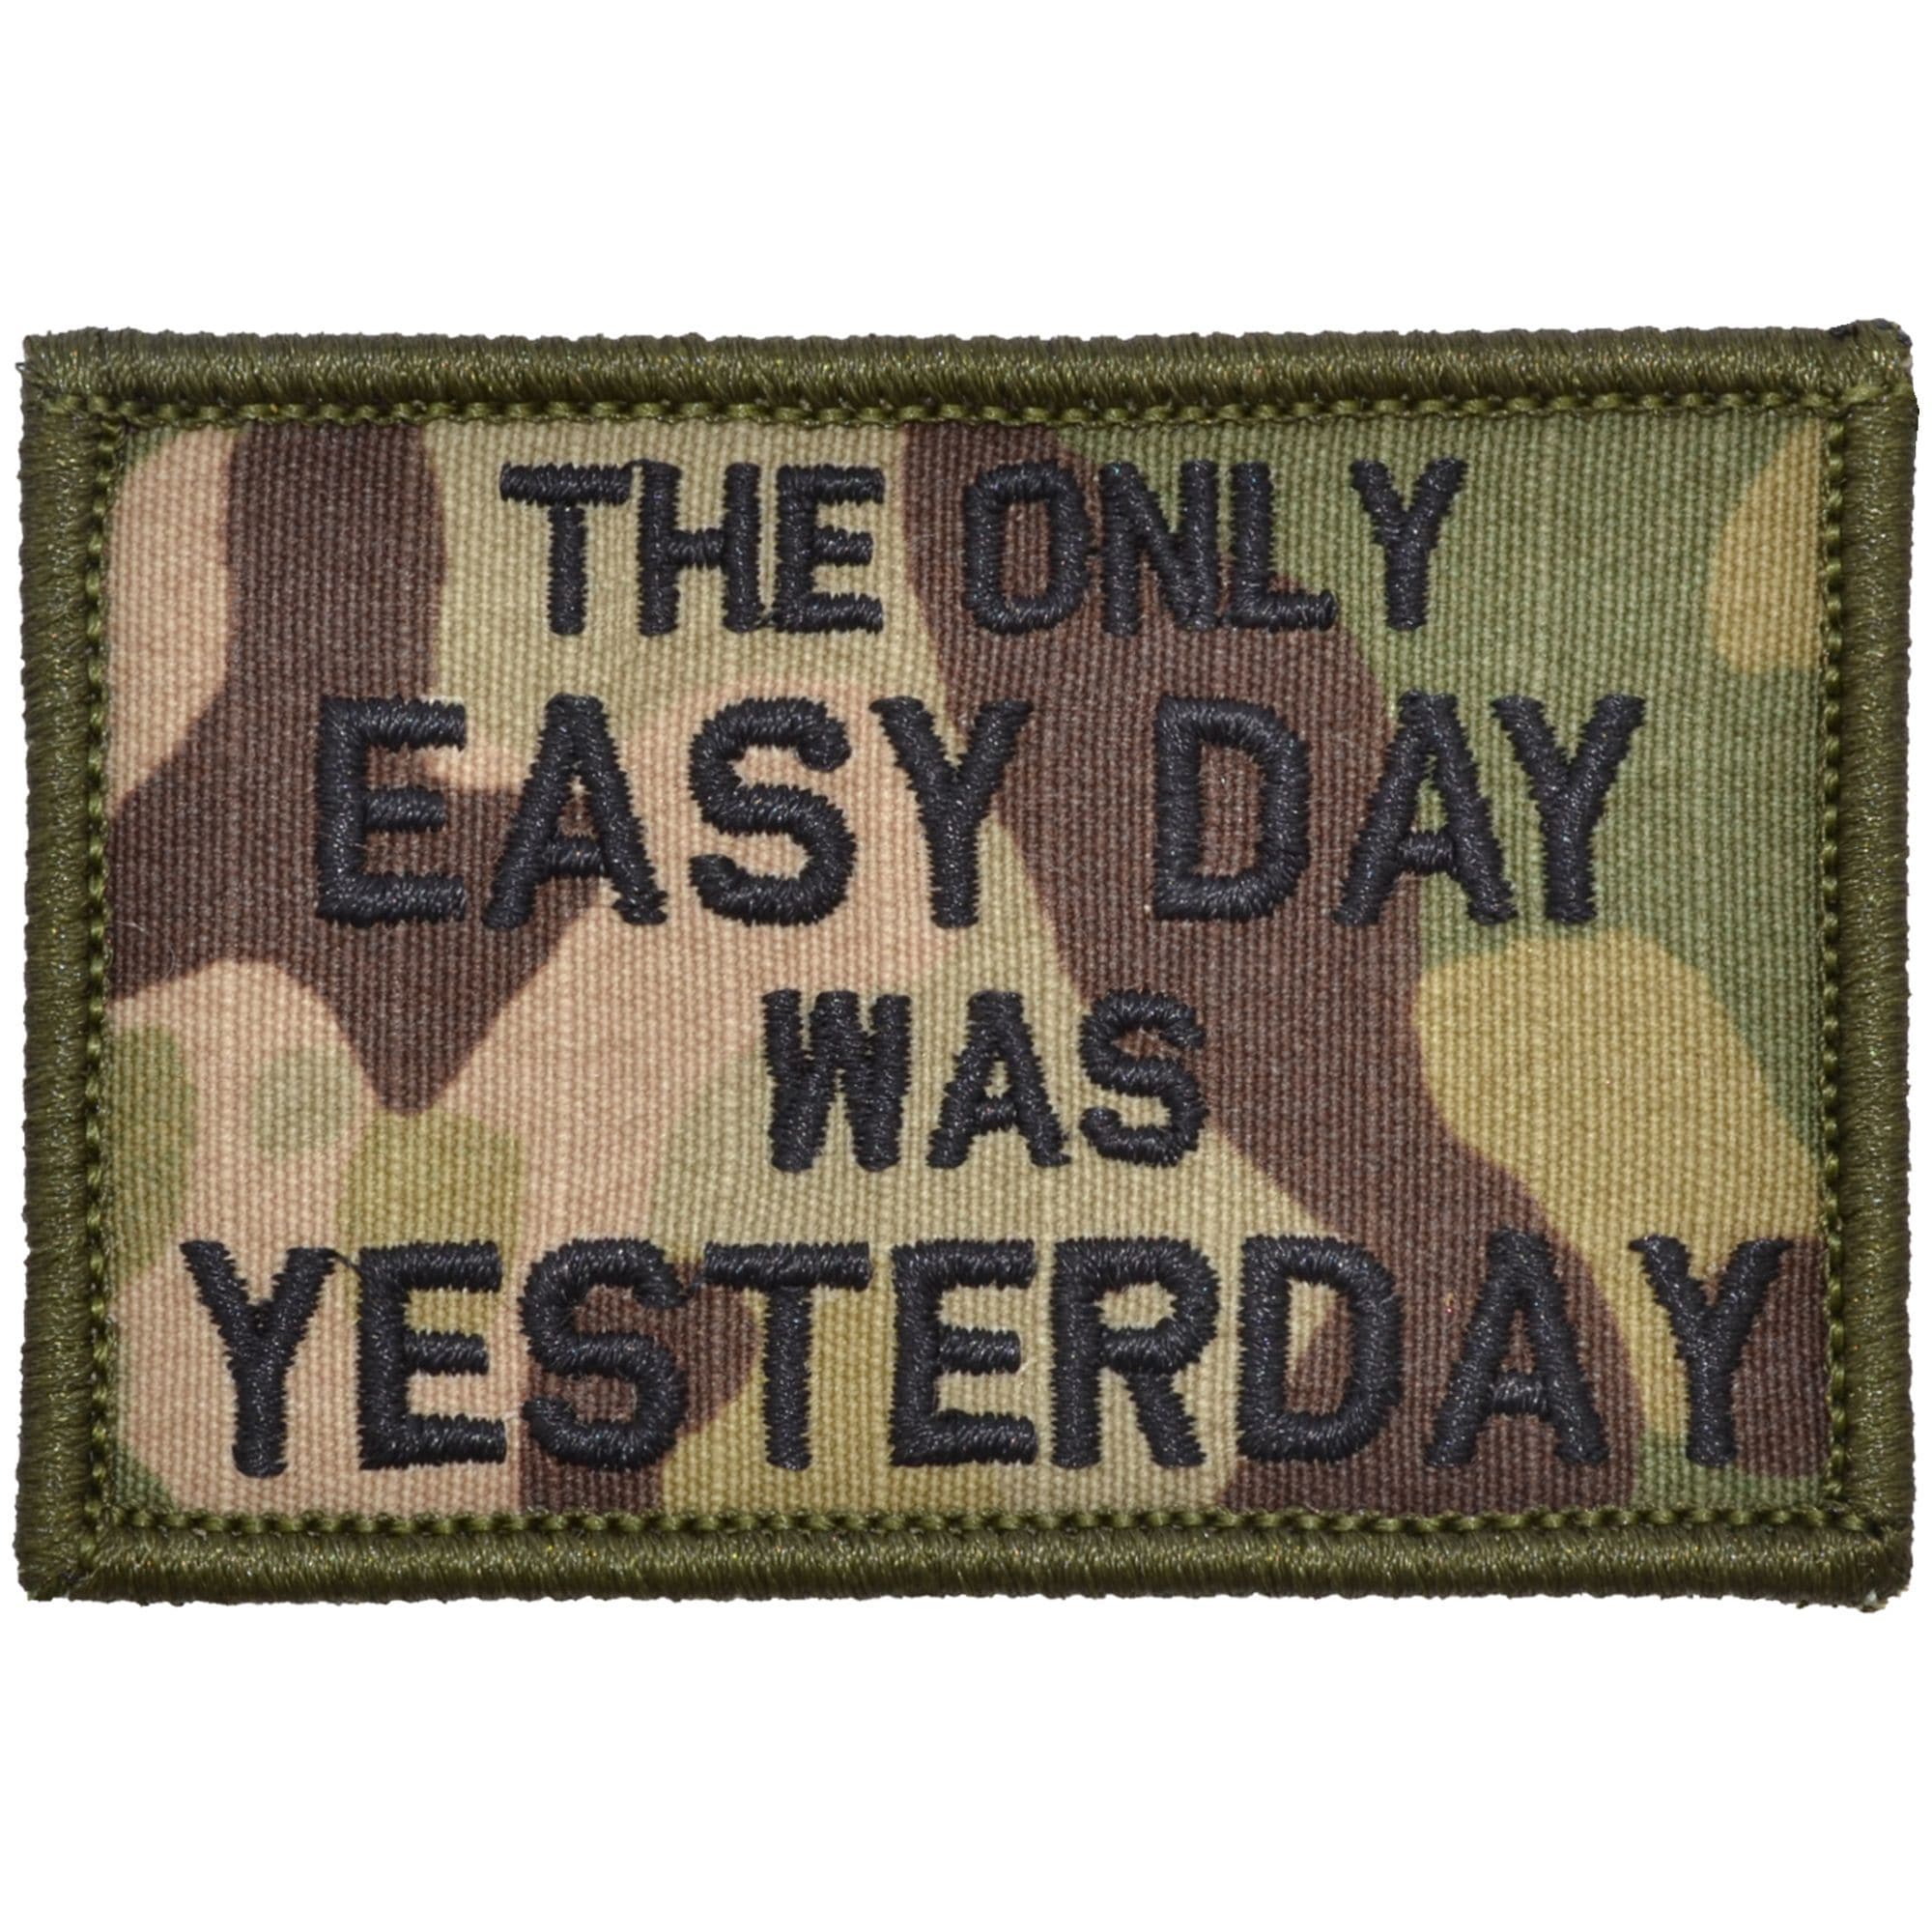 Tactical Gear Junkie Patches MultiCam The Only Easy Day Was Yesterday, Navy Seal Motto - 2x3 Patch